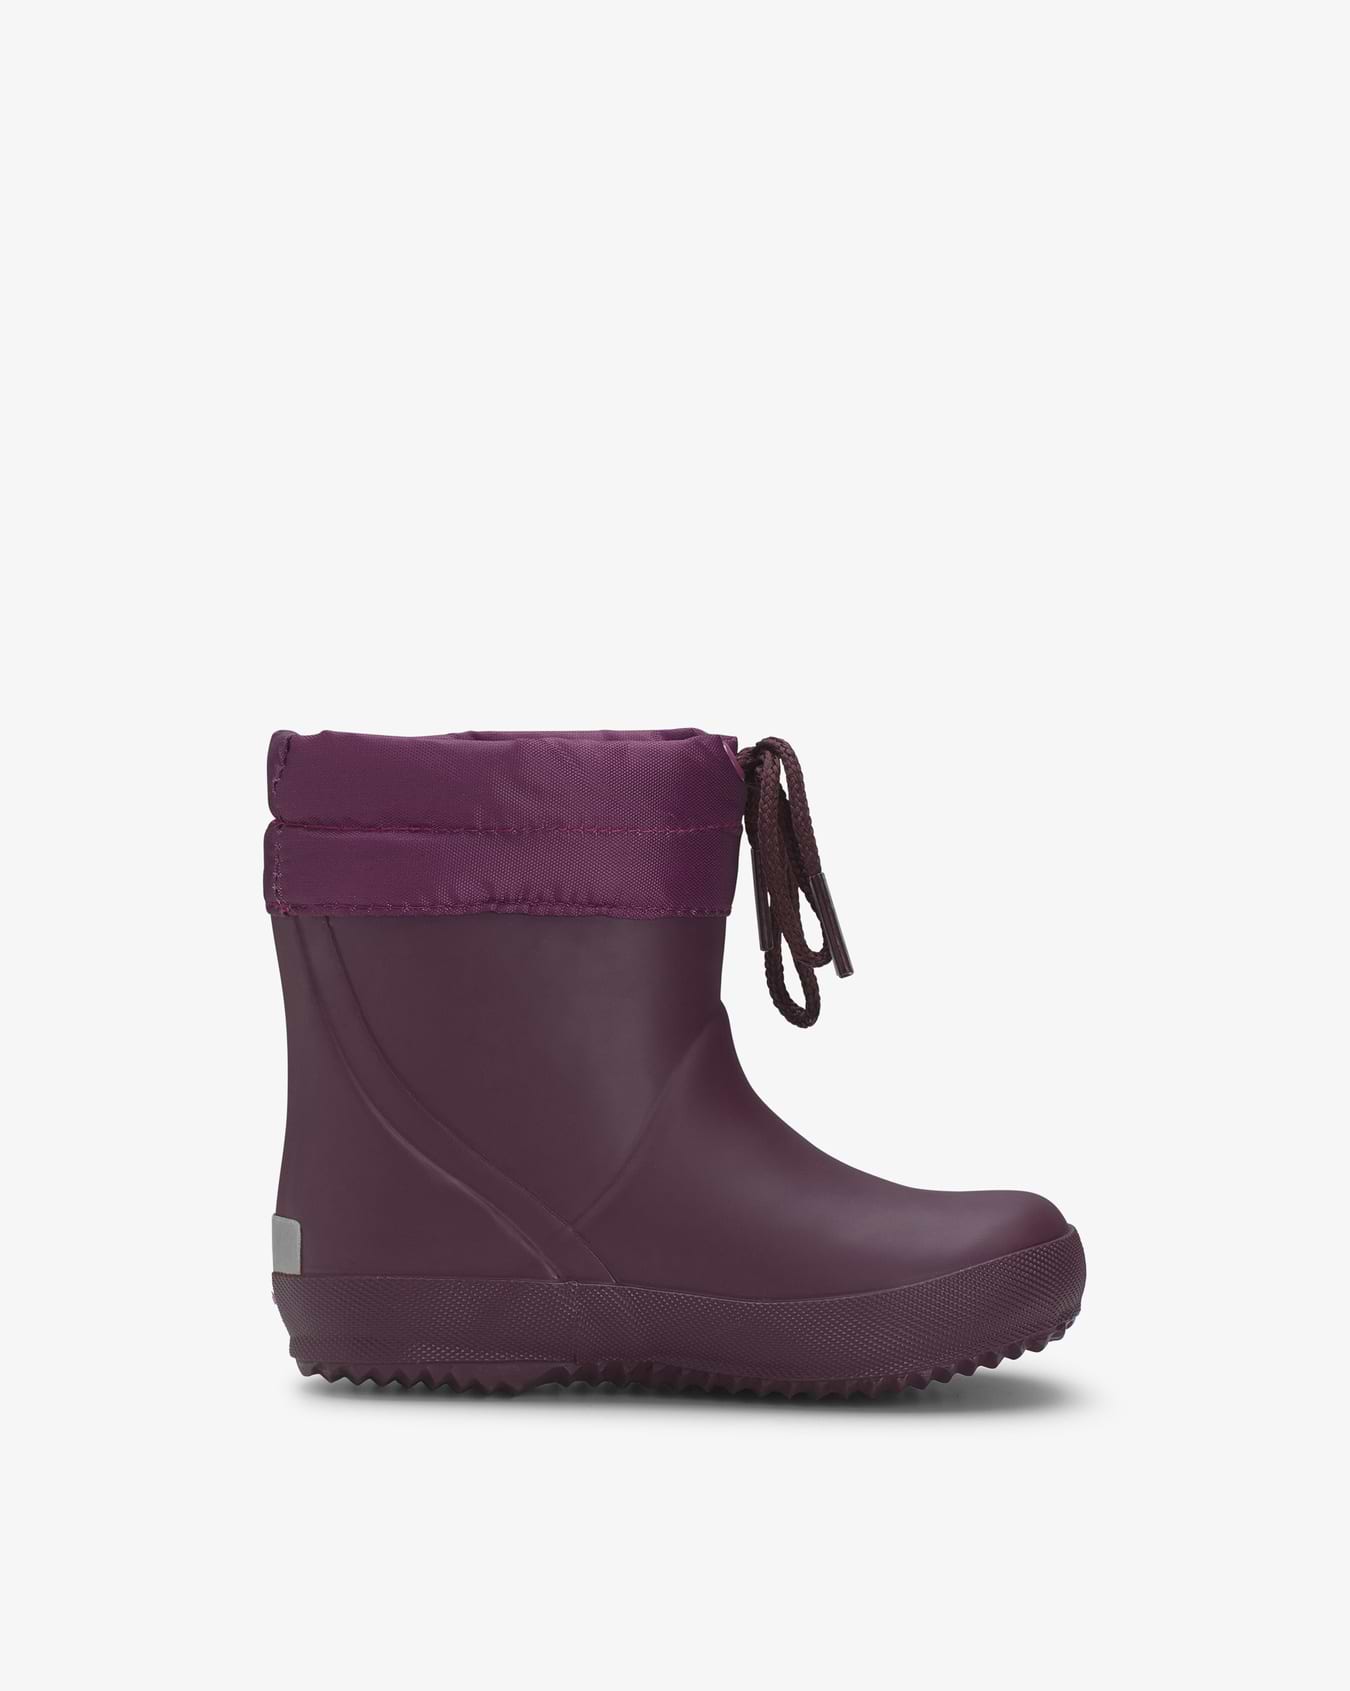 Viking Alv Indie Kids Rubber Boots Warmlined Purple